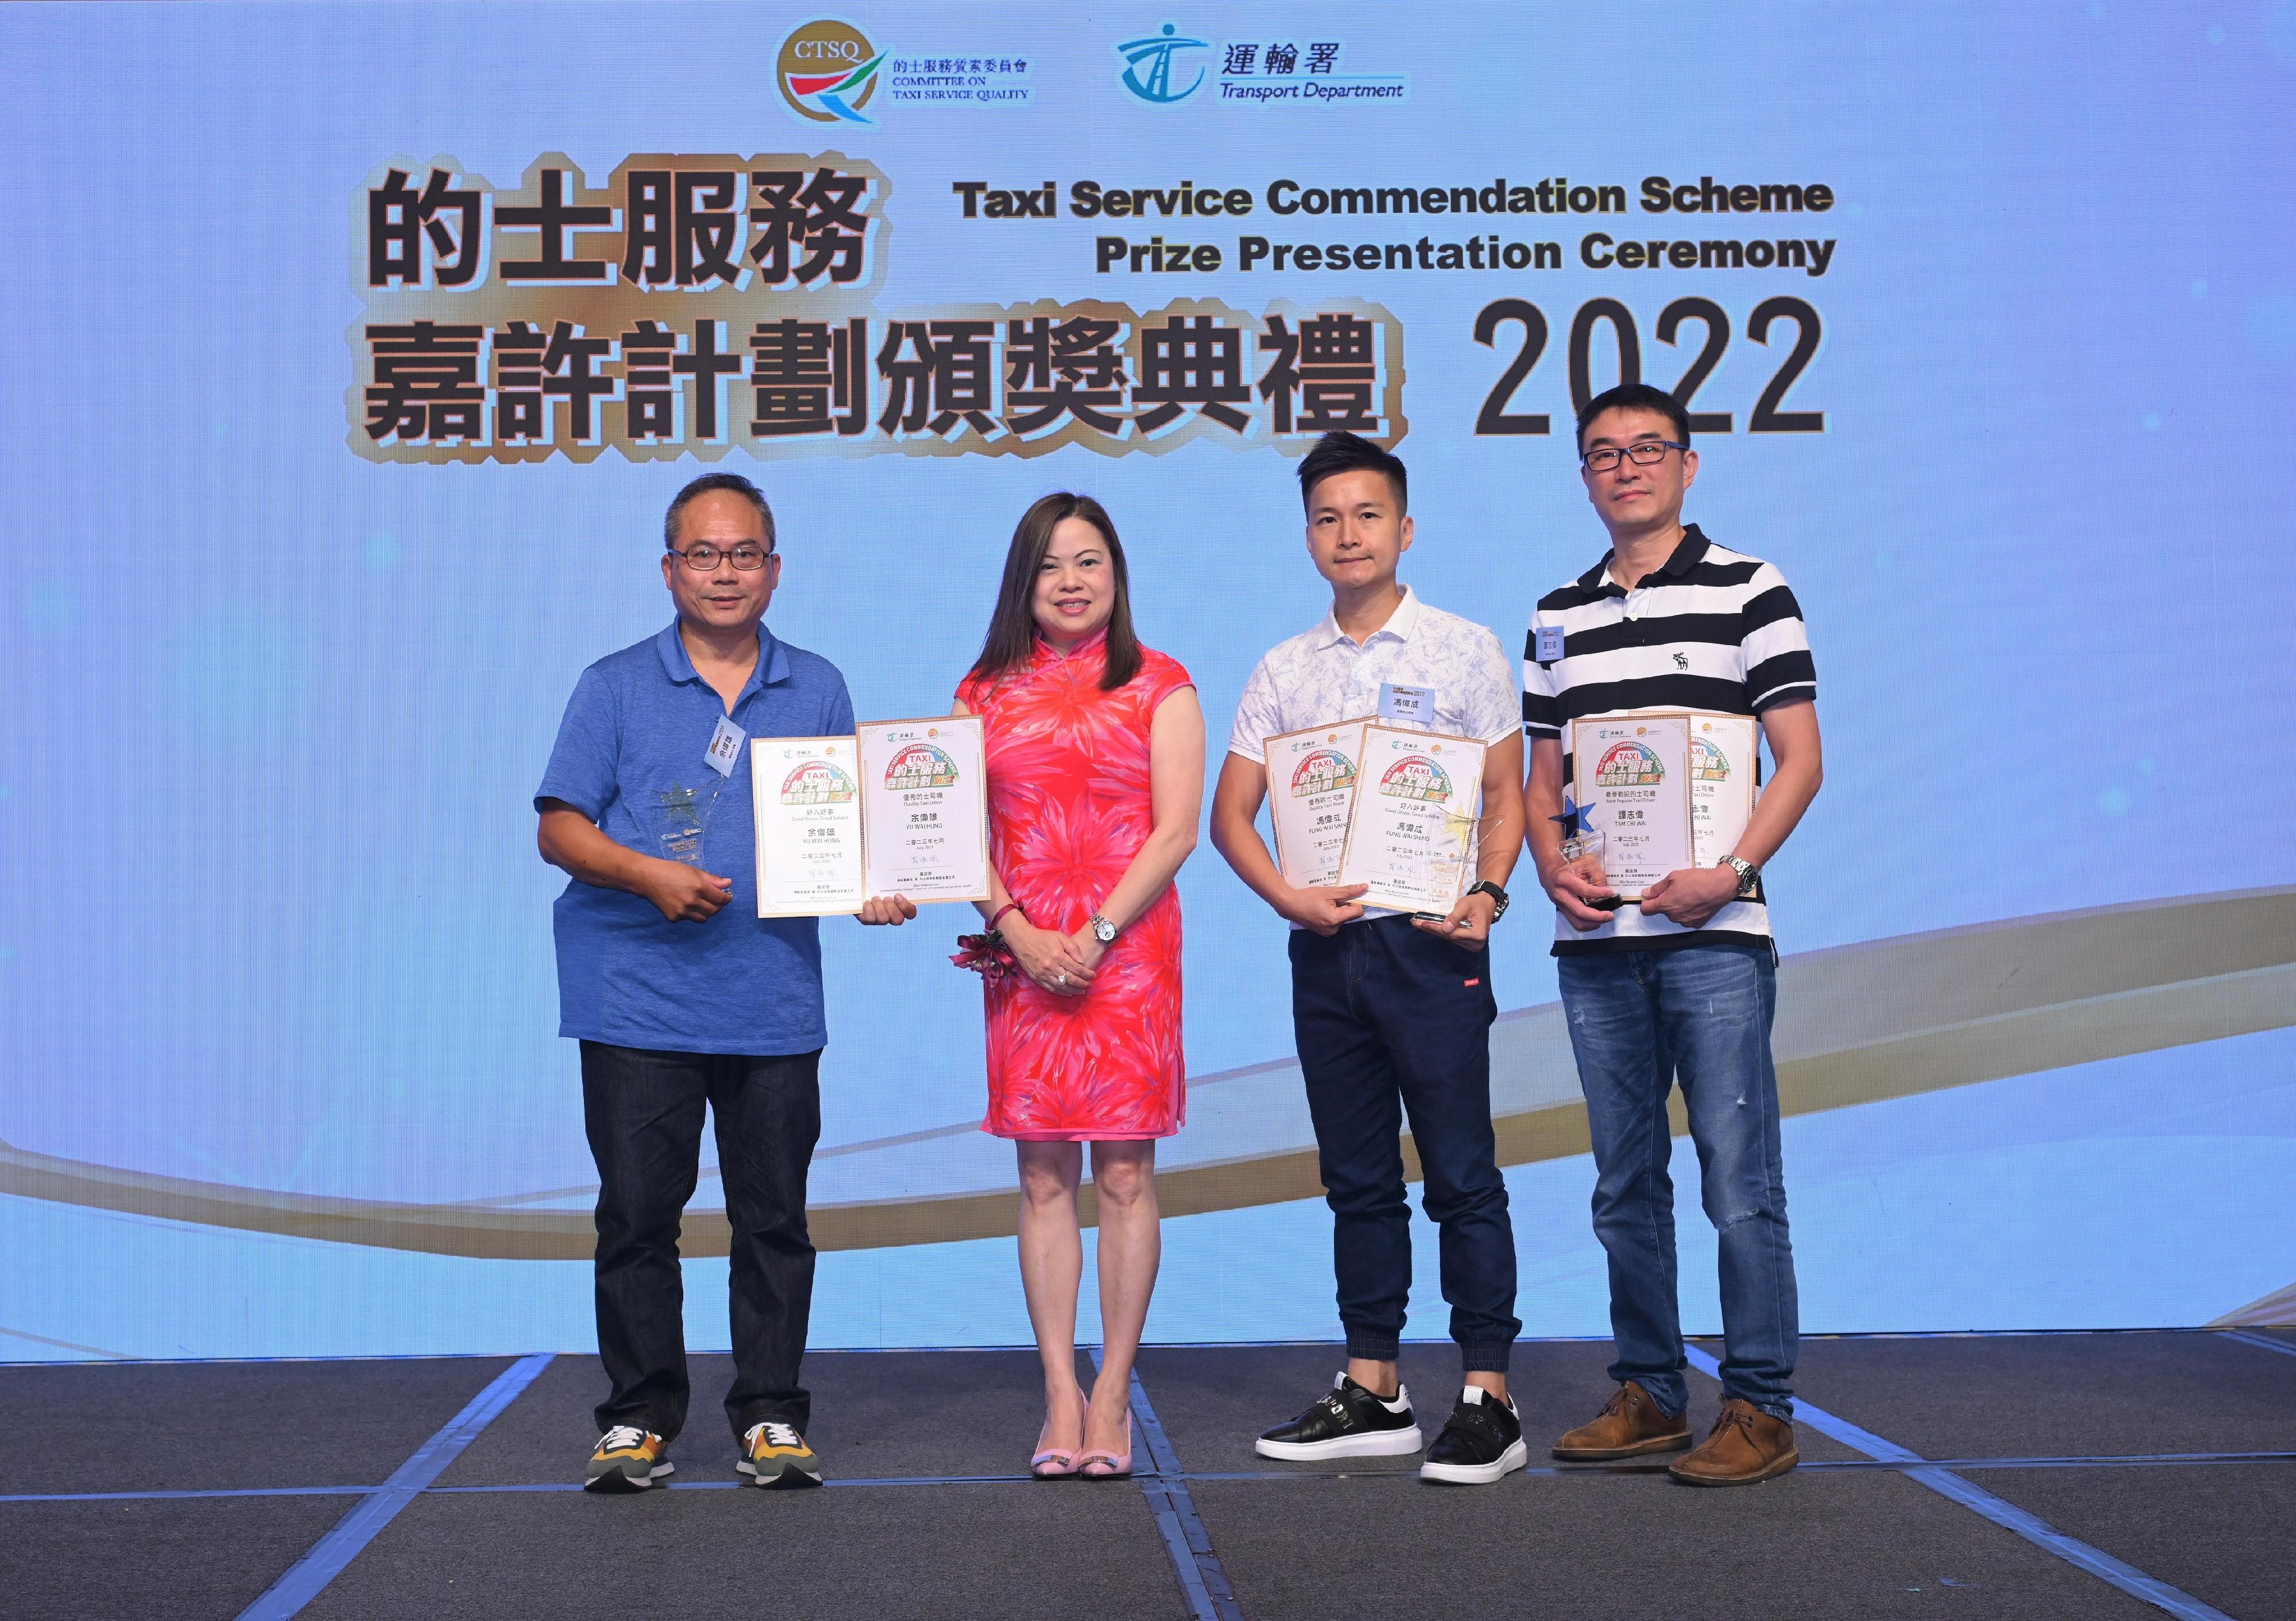 The prize presentation ceremony for the Taxi Service Commendation Scheme 2022, jointly organised by the Committee on Taxi Service Quality (CTSQ) and the Transport Department, was held today (July 14). The CTSQ Chairman and Commissioner for Transport, Miss Rosanna Law (second left), is pictured with the winners of Good Driver, Good Service awards and Most Popular Taxi Driver award.